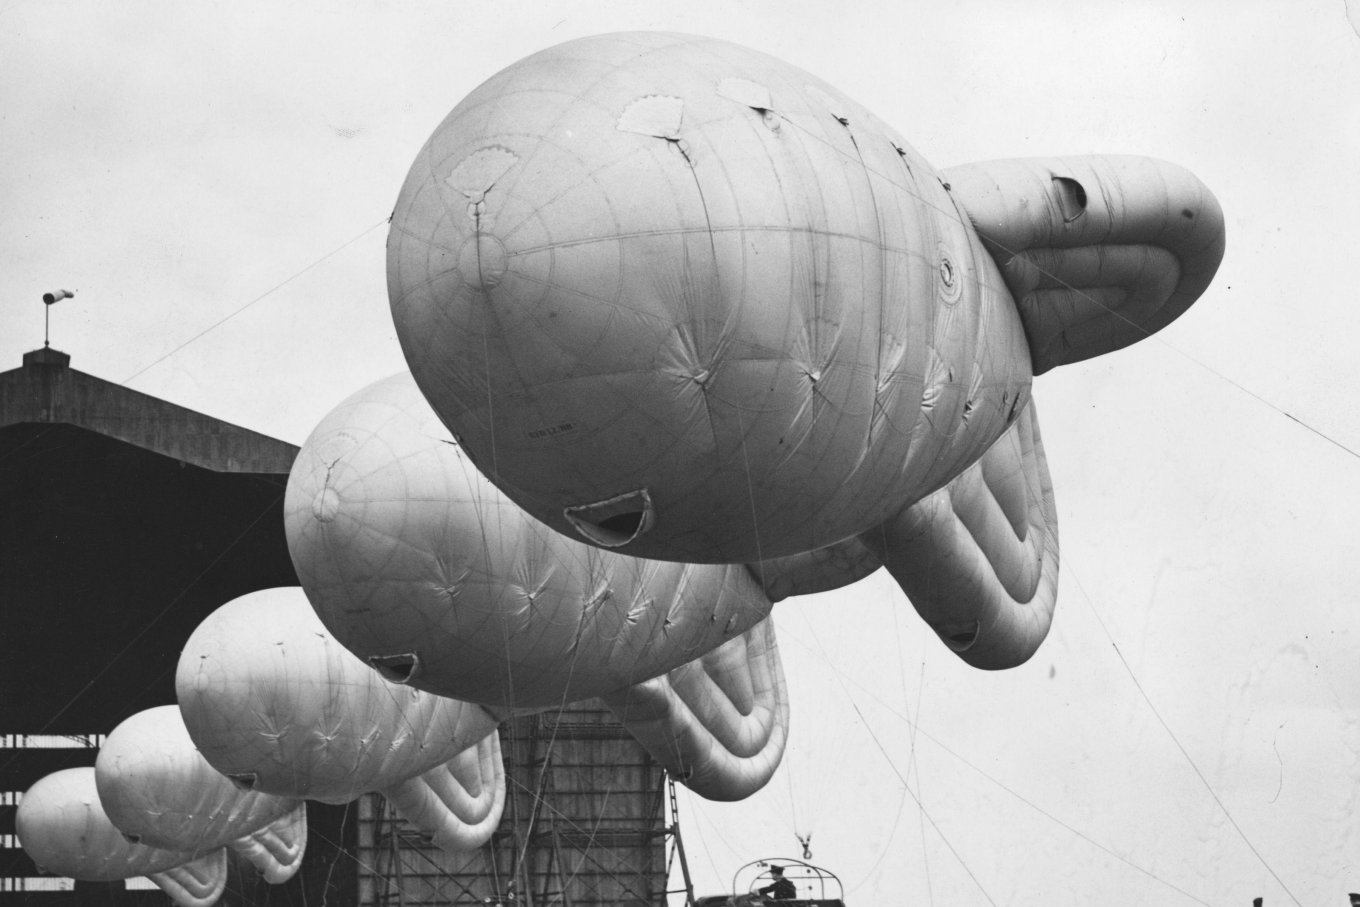 The preparation for aerostat launch by the Royal Air Force during the Second World War Defense Express Ukrainian Aerostat Perspective, Considering Great Britain Couldn’t Afford Such Campaign Now